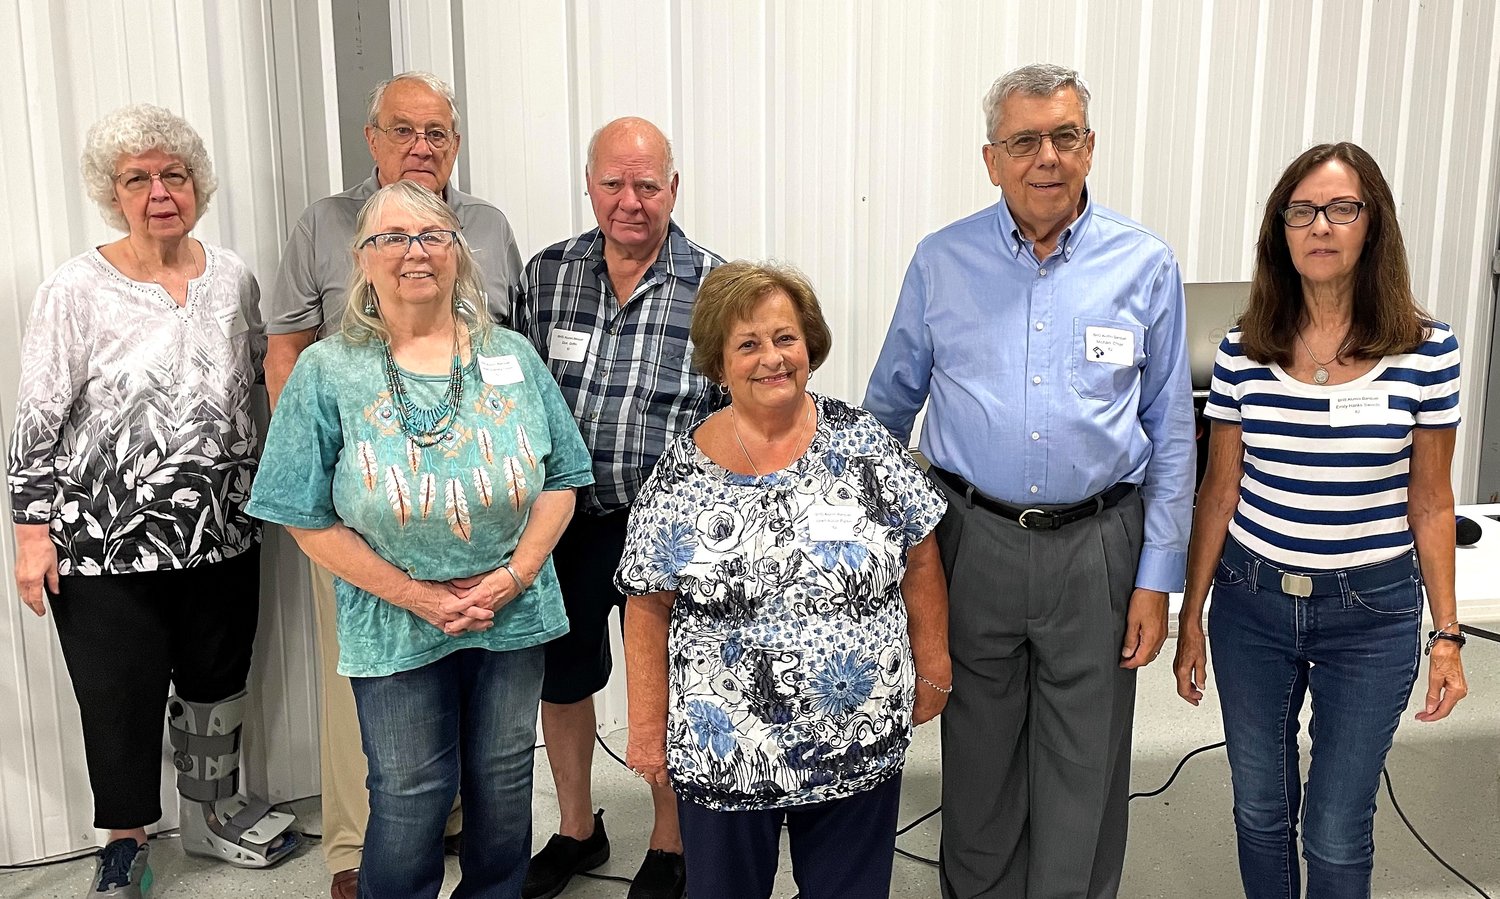 The BHS Alumni Association recently honored the class of 1962 at their annual banquet for 60 years since graduation. From left, front row, Janet Stanley Oliver and Janet Austin Parker; and back row, Jessie Lukenbill Detro, David Priest, Don Griffin, Michael T. O’Hair and Emily Hanks Swords. In attendance, but not available for the photo, was Steve Winslow.